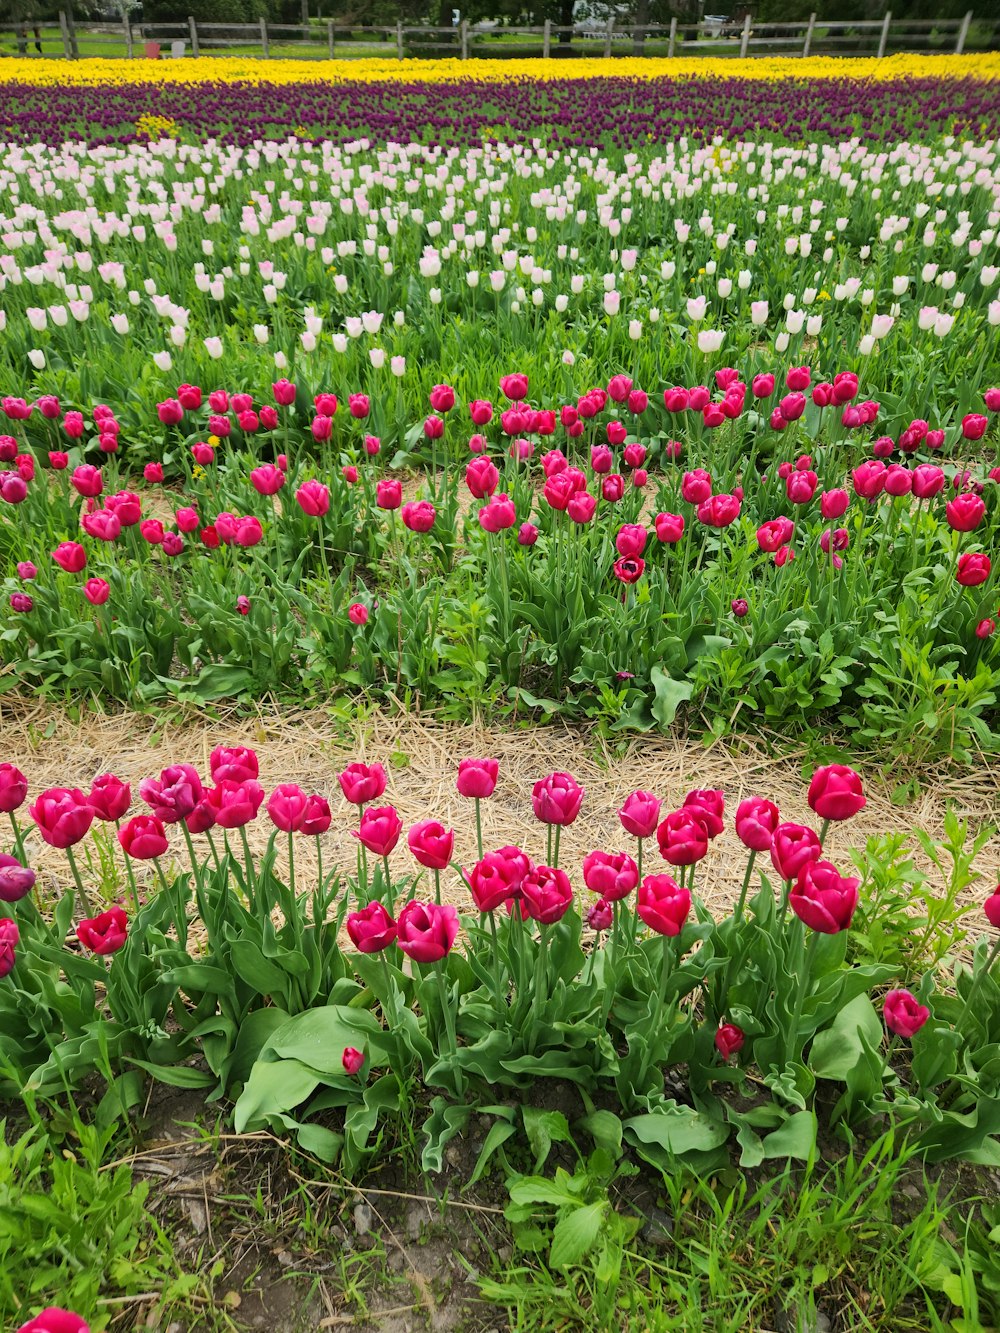 a field full of pink and white tulips